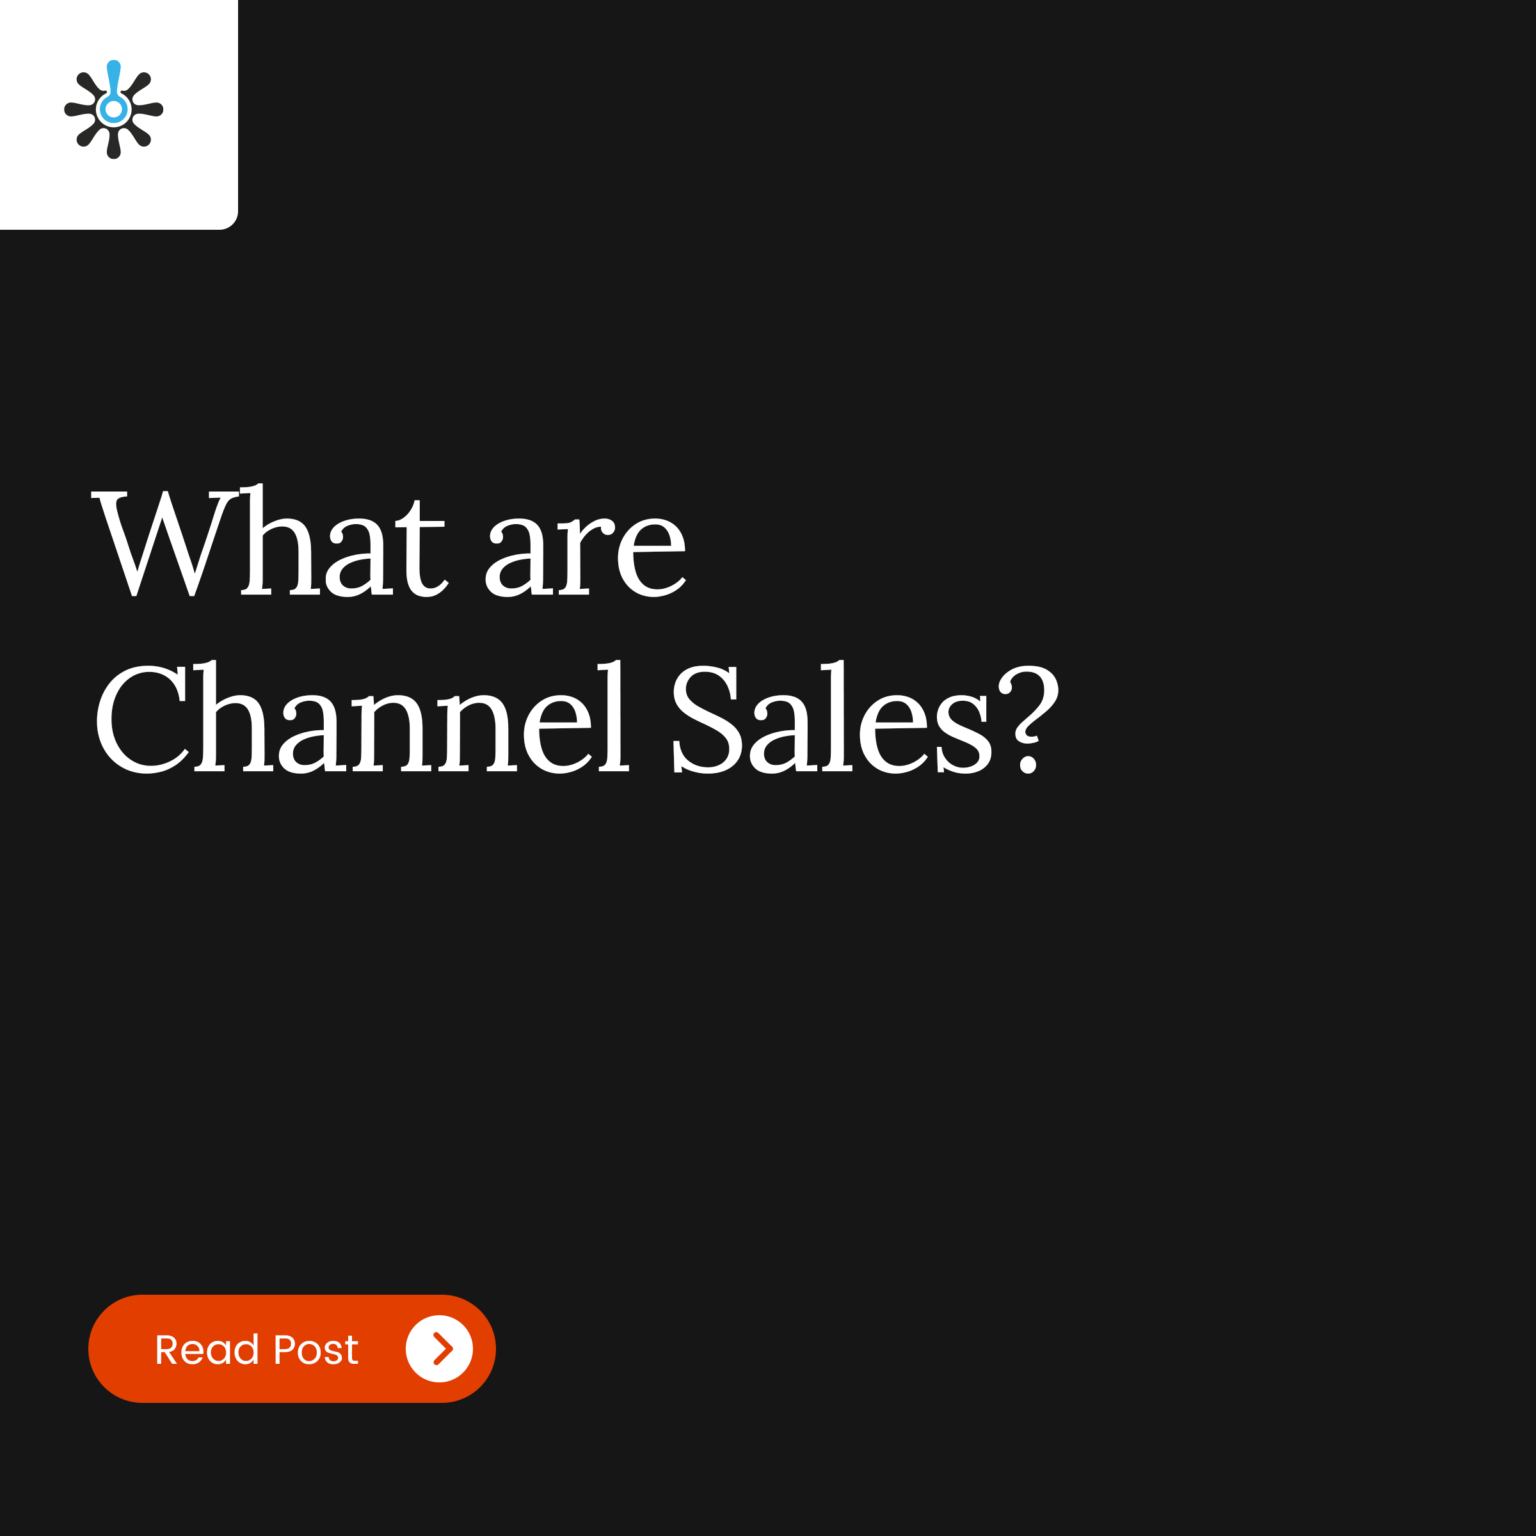 Title Page Reading "What are Channel Sales?"